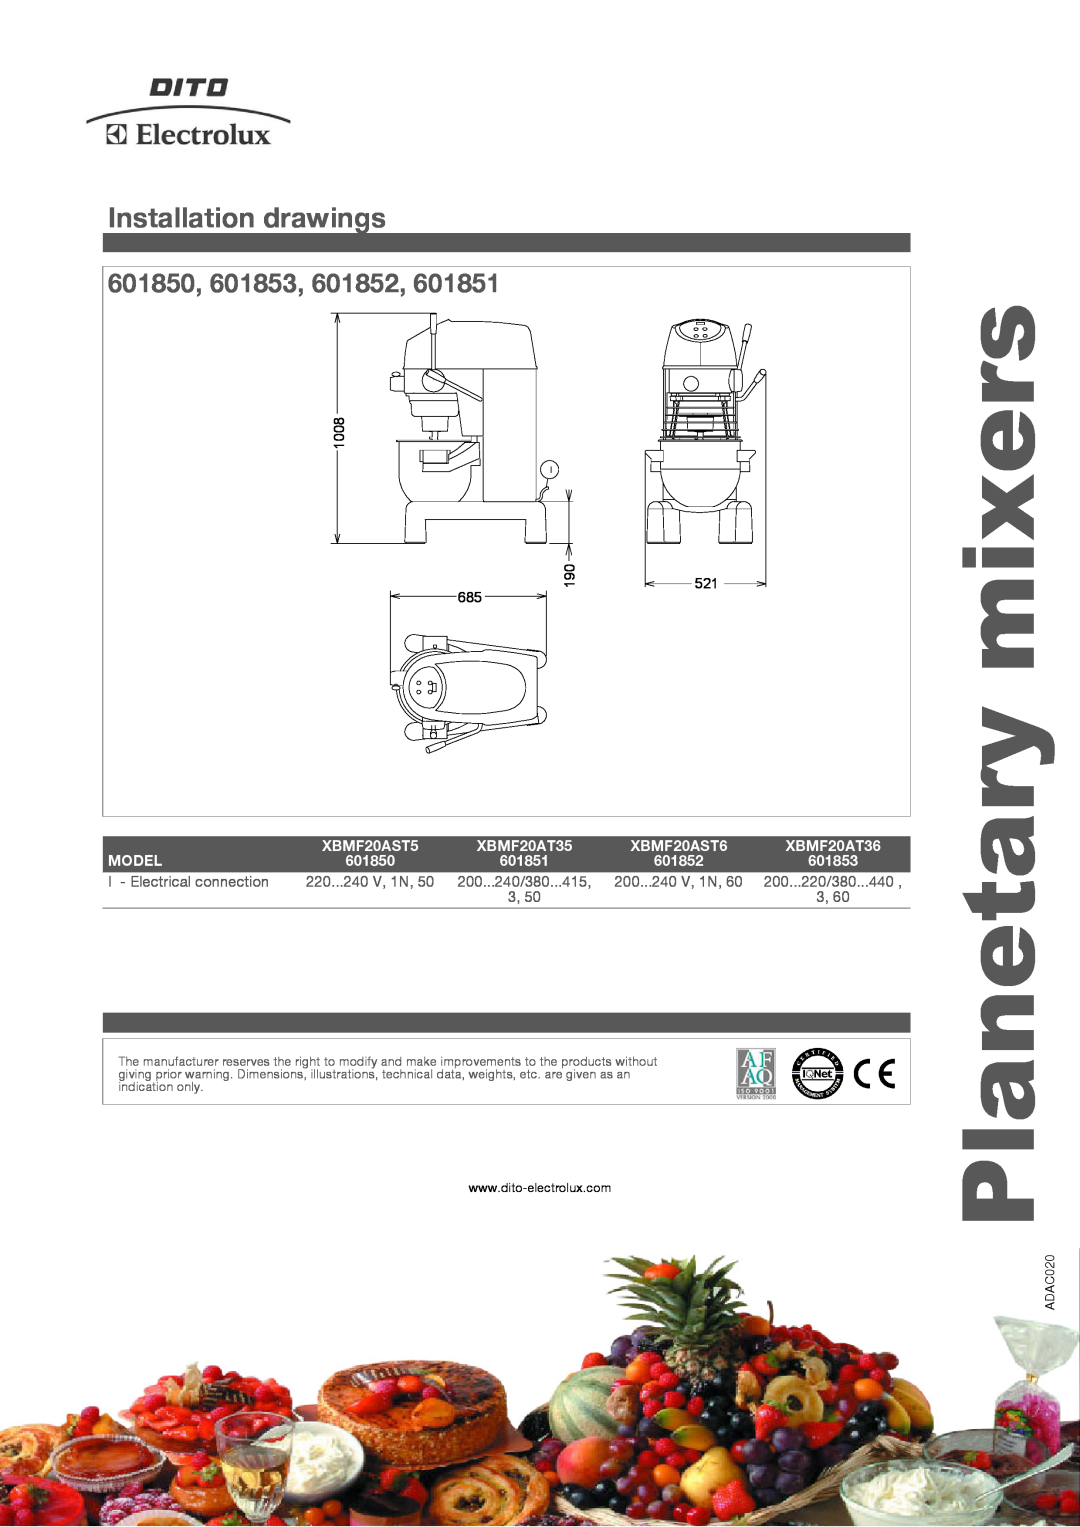 Electrolux XBMF20AST5 manual Installation drawings, 601850, 601853, 601852, mixers, Planetary, I - Electrical connection 